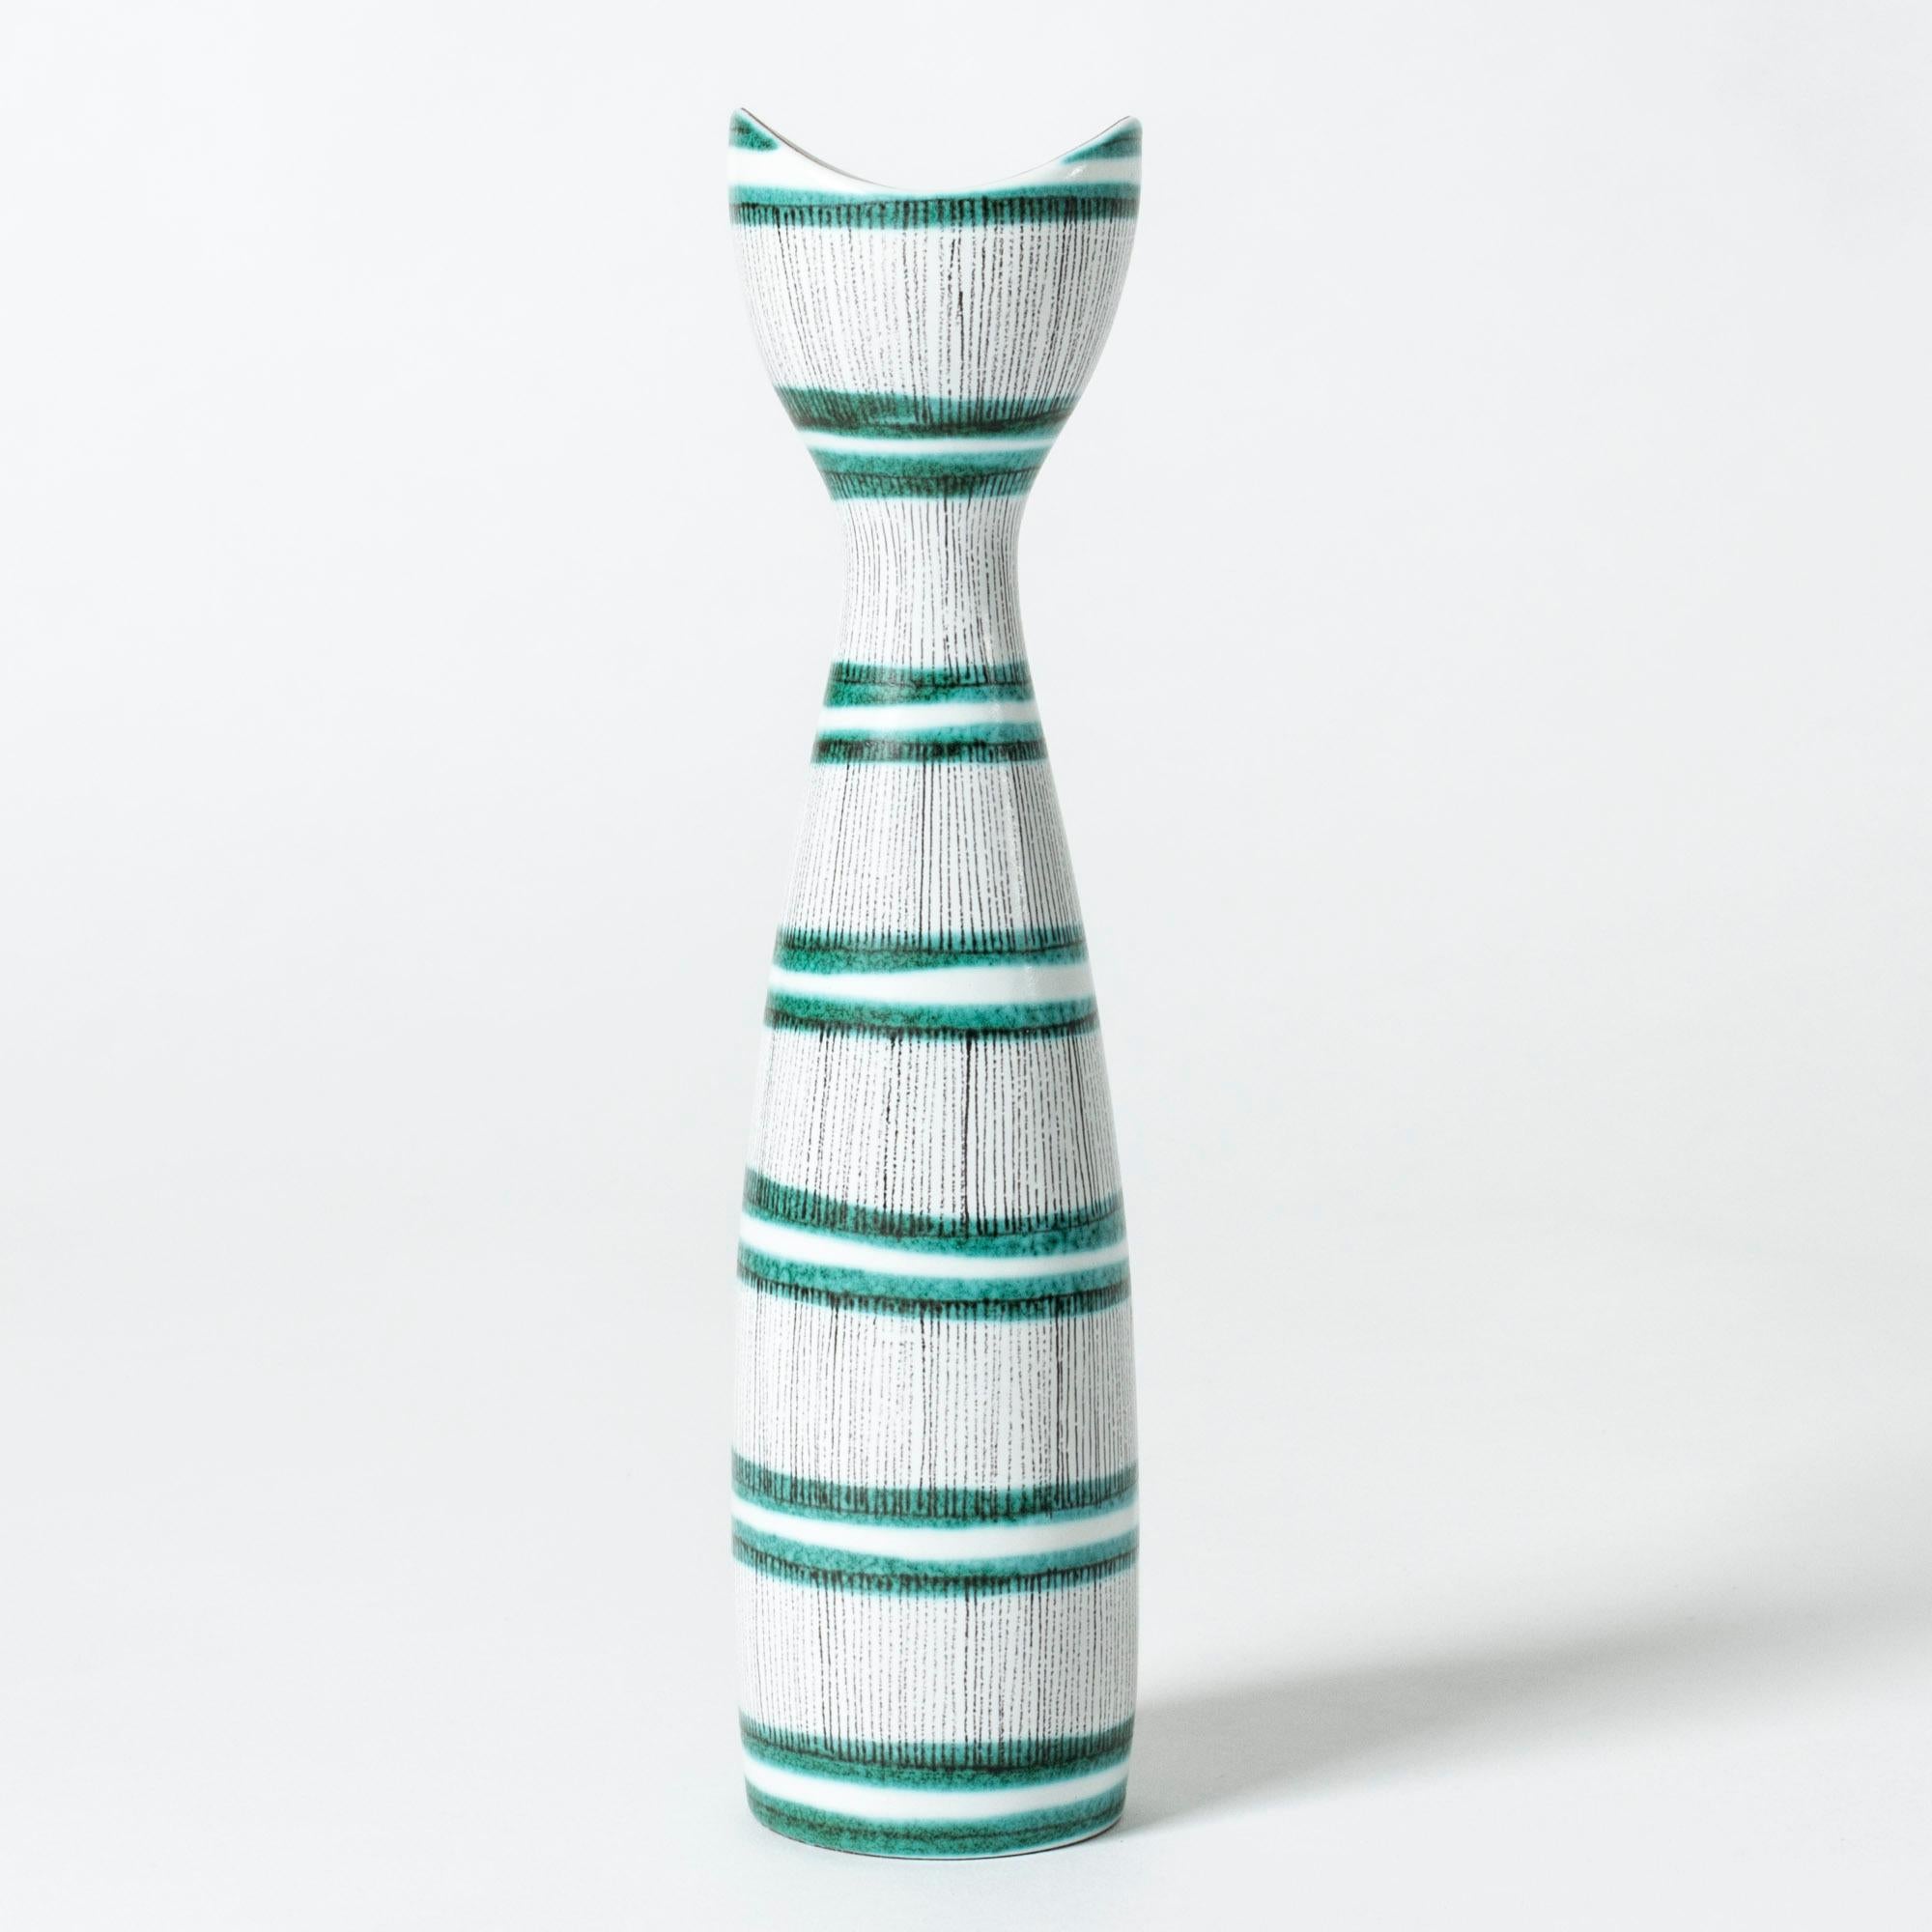 Cool faience vase by Stig Lindberg, in a lively, fun form. Graphic pattern of black and green stripes, elegantly hand-painted.